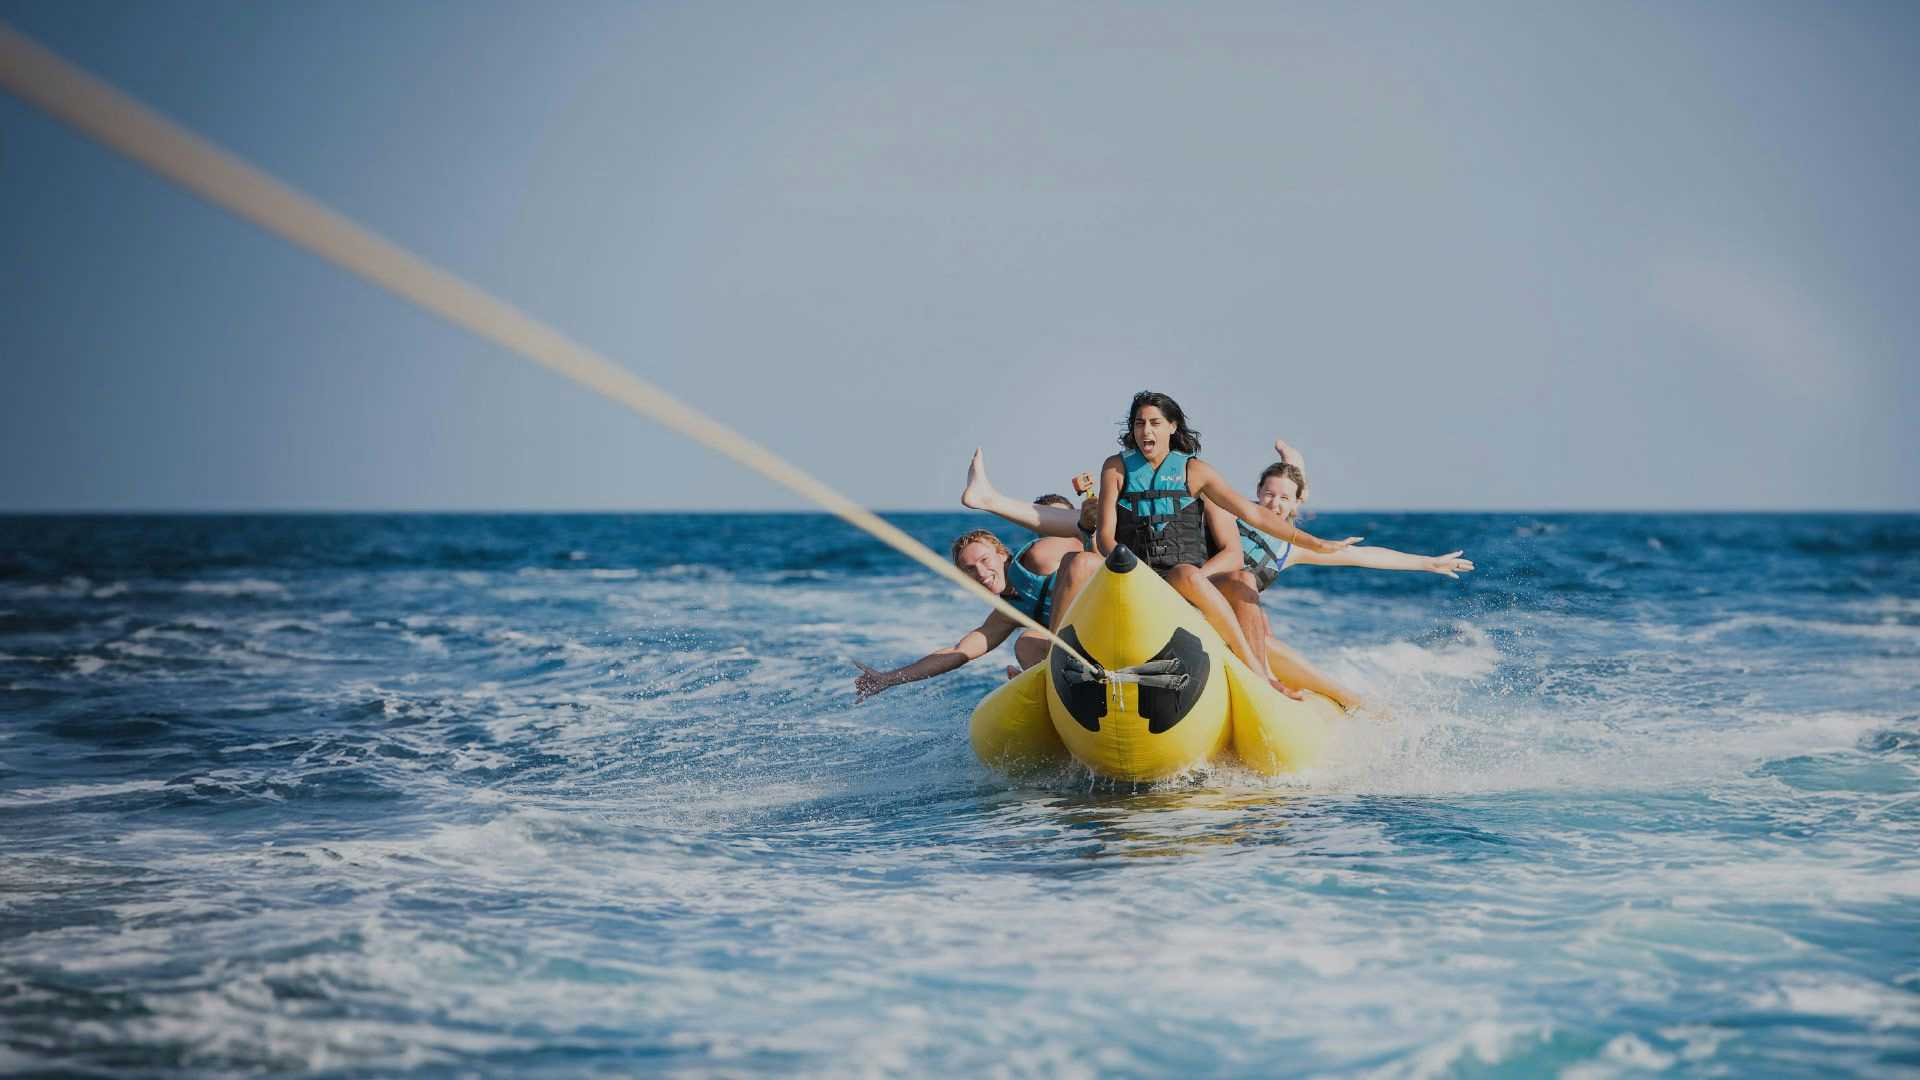 MedSailors guests riding a banana boat in Greece